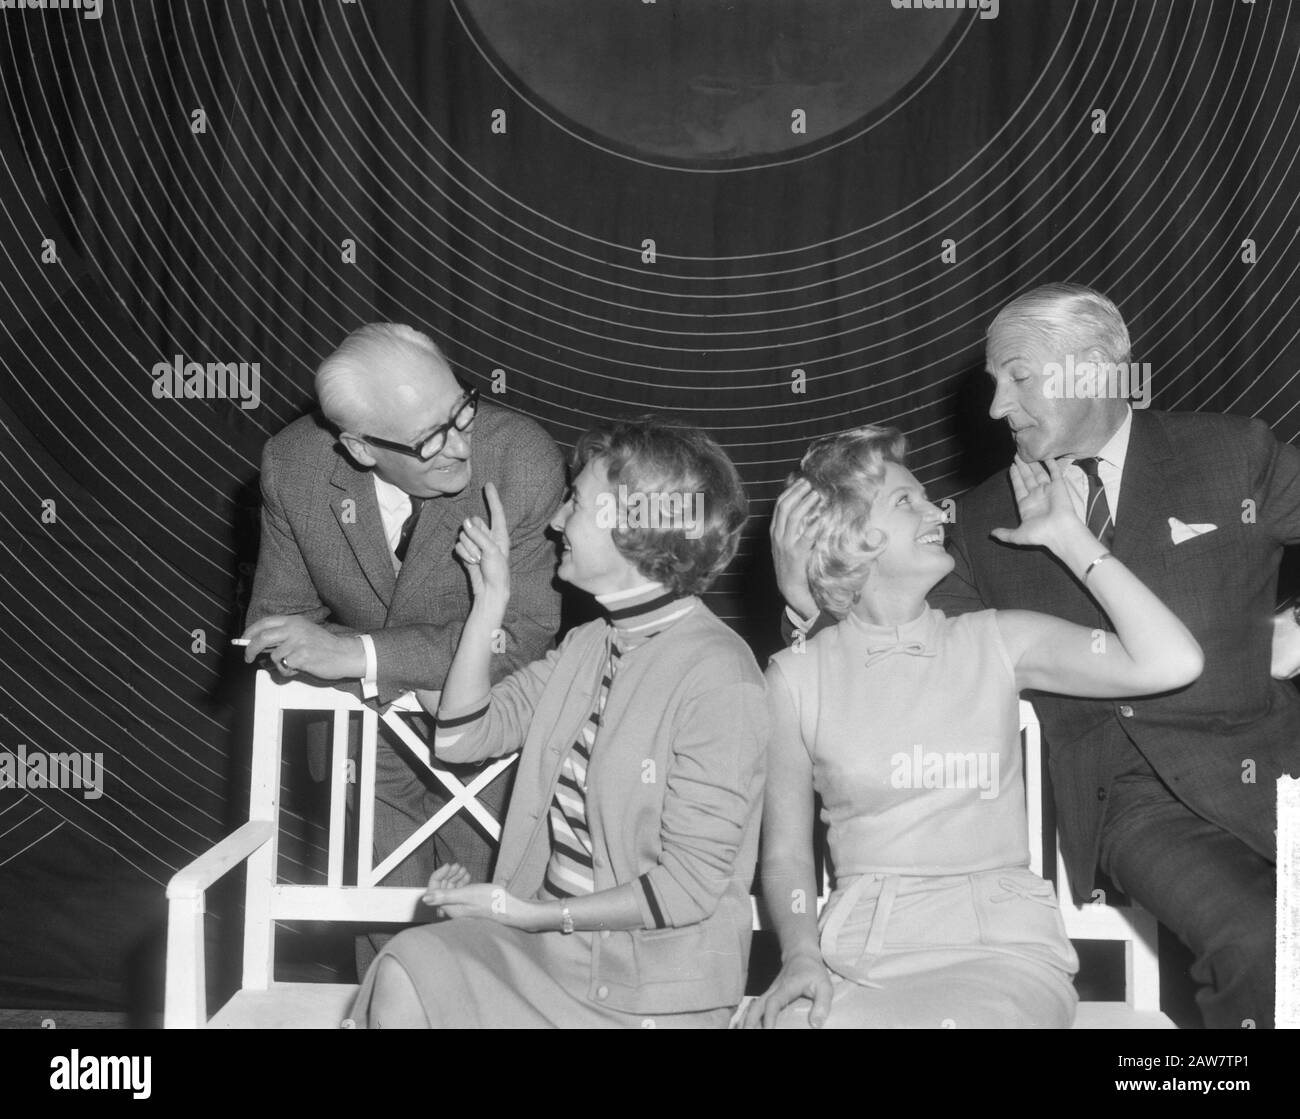 Premiere Snip and Snap Together revue From Friday, during rehearsal v.l.n.r. Piet Muyselaar, Aase Rasmussen, Mieke Telkamp and Willy Walden Date: January 21, 1965 Keywords: rehearsals, revues Person Name: Muyselaar, Peter Rasmussen, Aase, Telkamp, Mieke, Walden, Willy Stock Photo